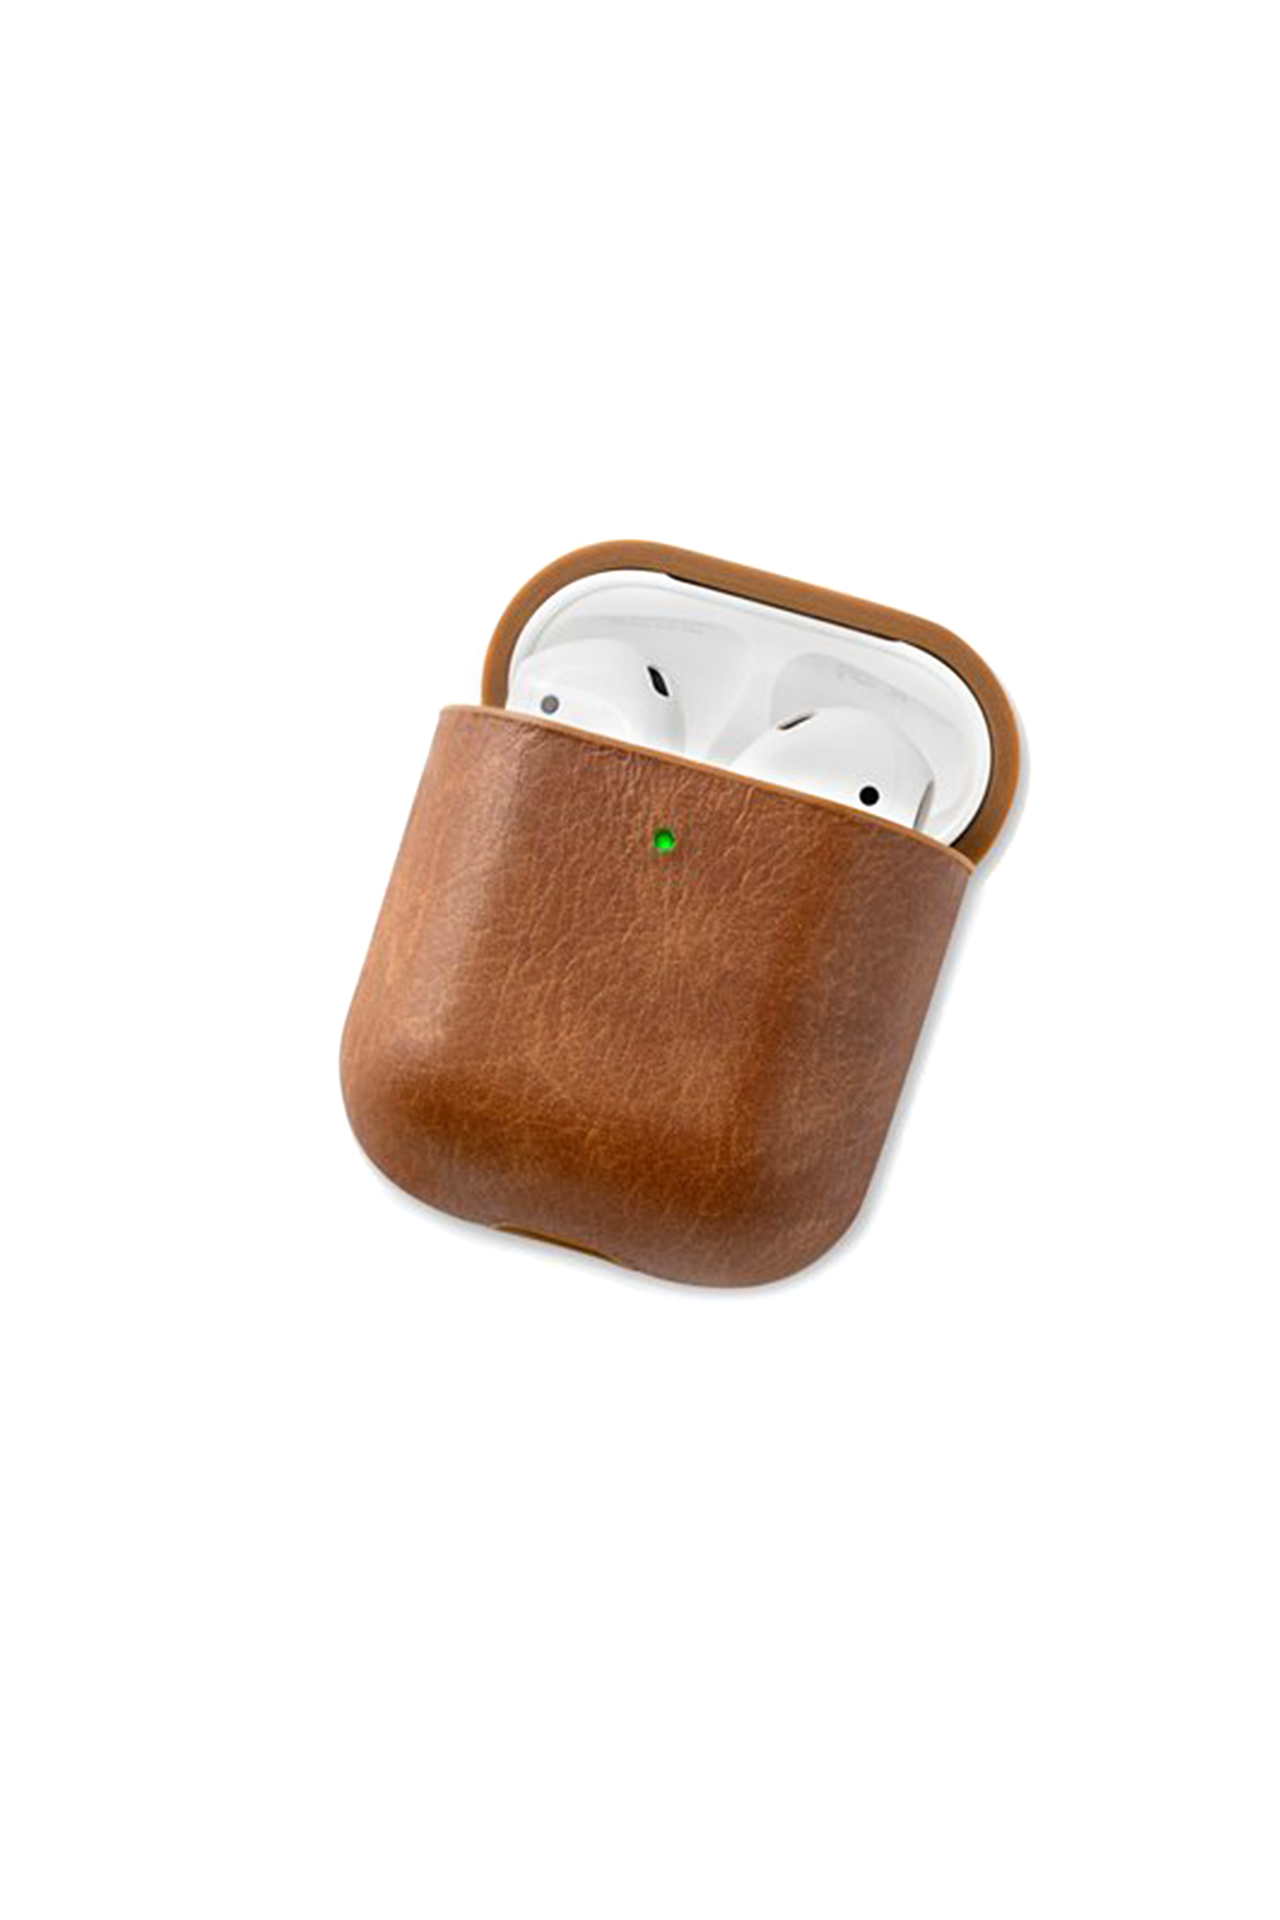 Courant Airpods Leather Case Brown Open Detail Image (6604412944499)